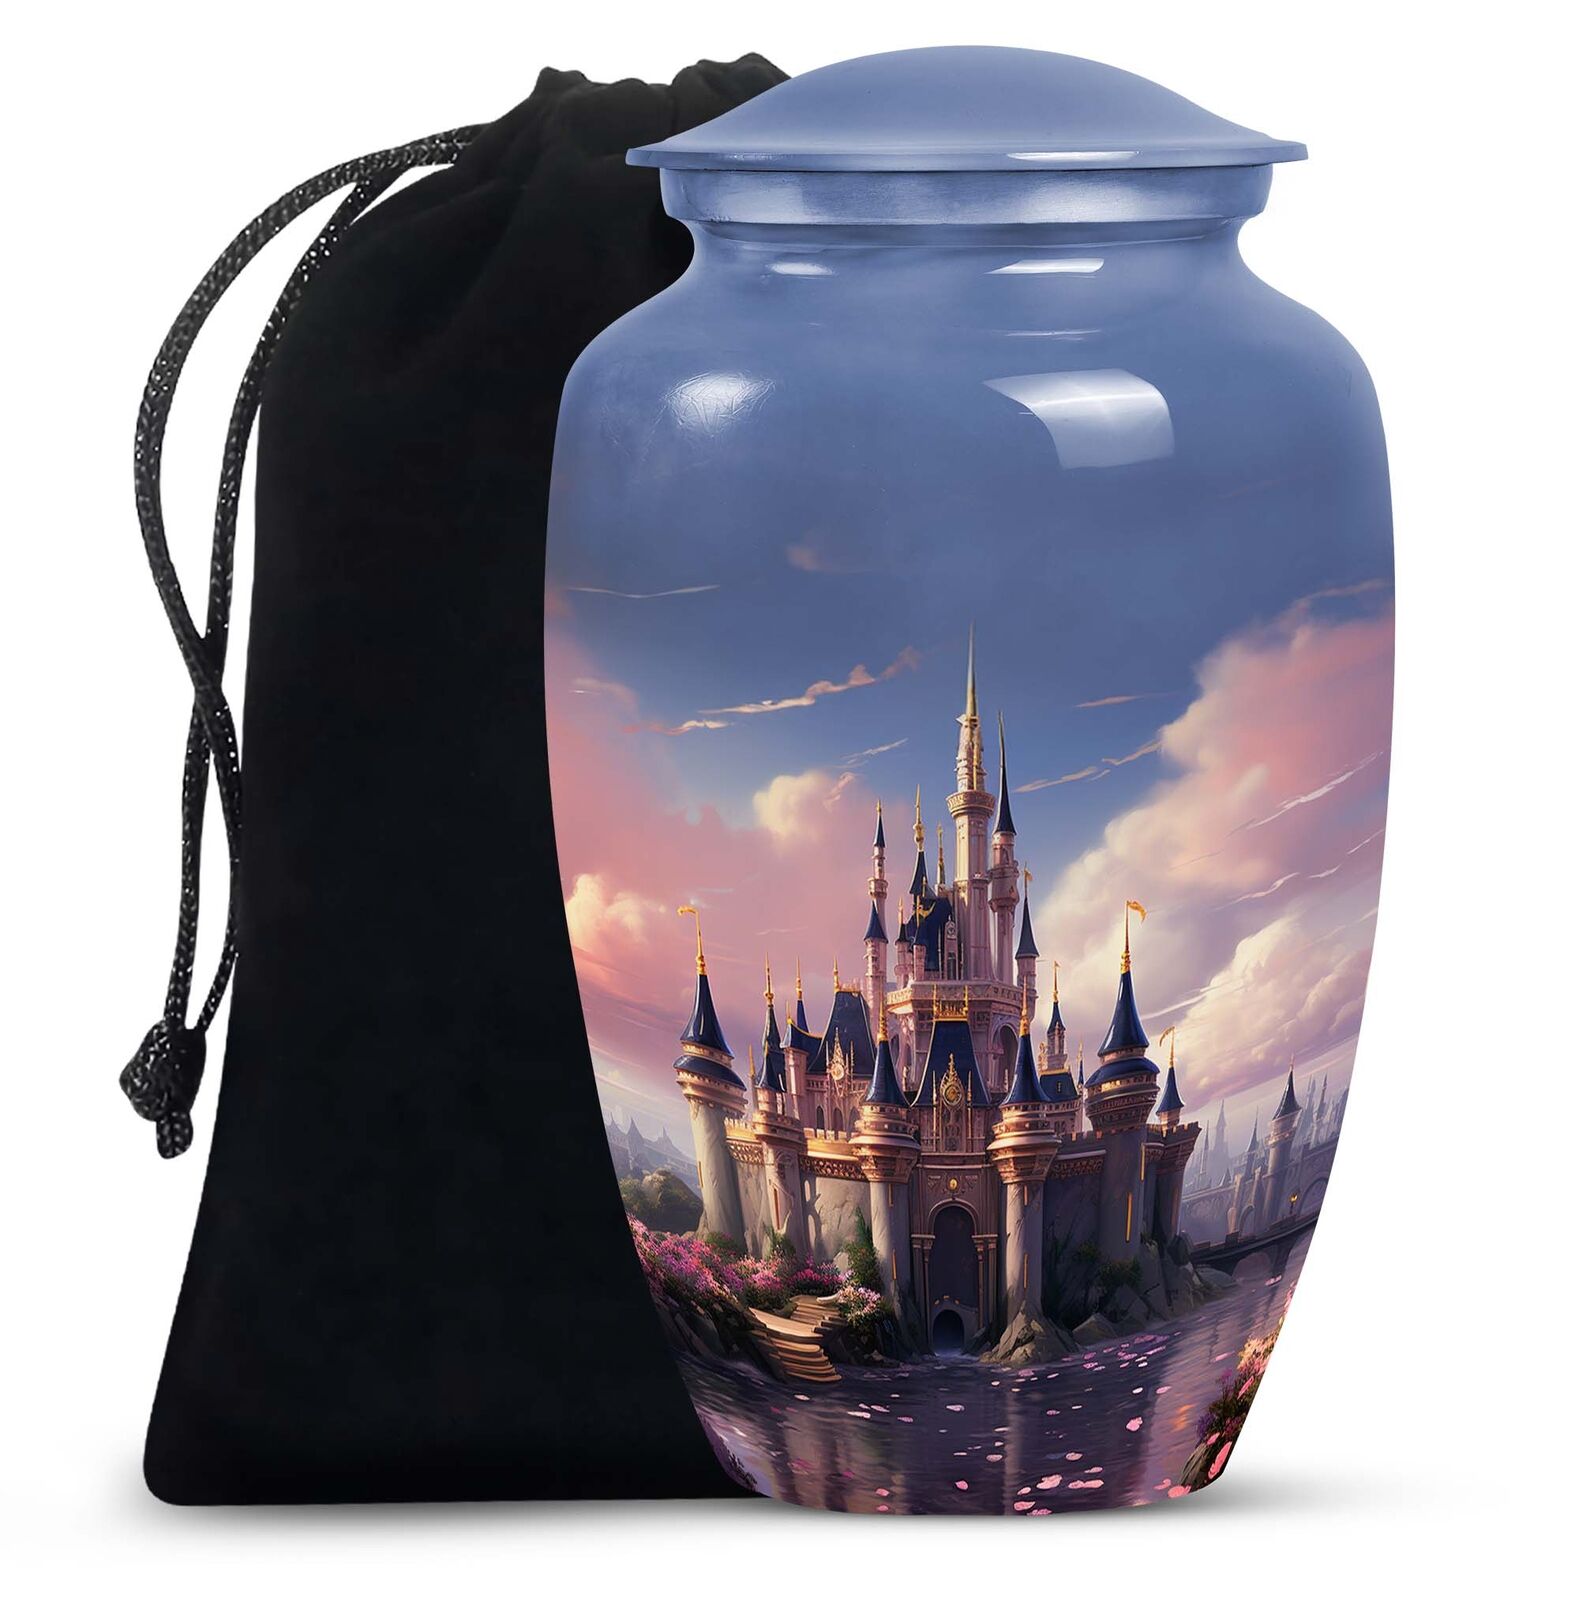 The Castle By The Blooming River - Cremation Urn For Adult Ashes